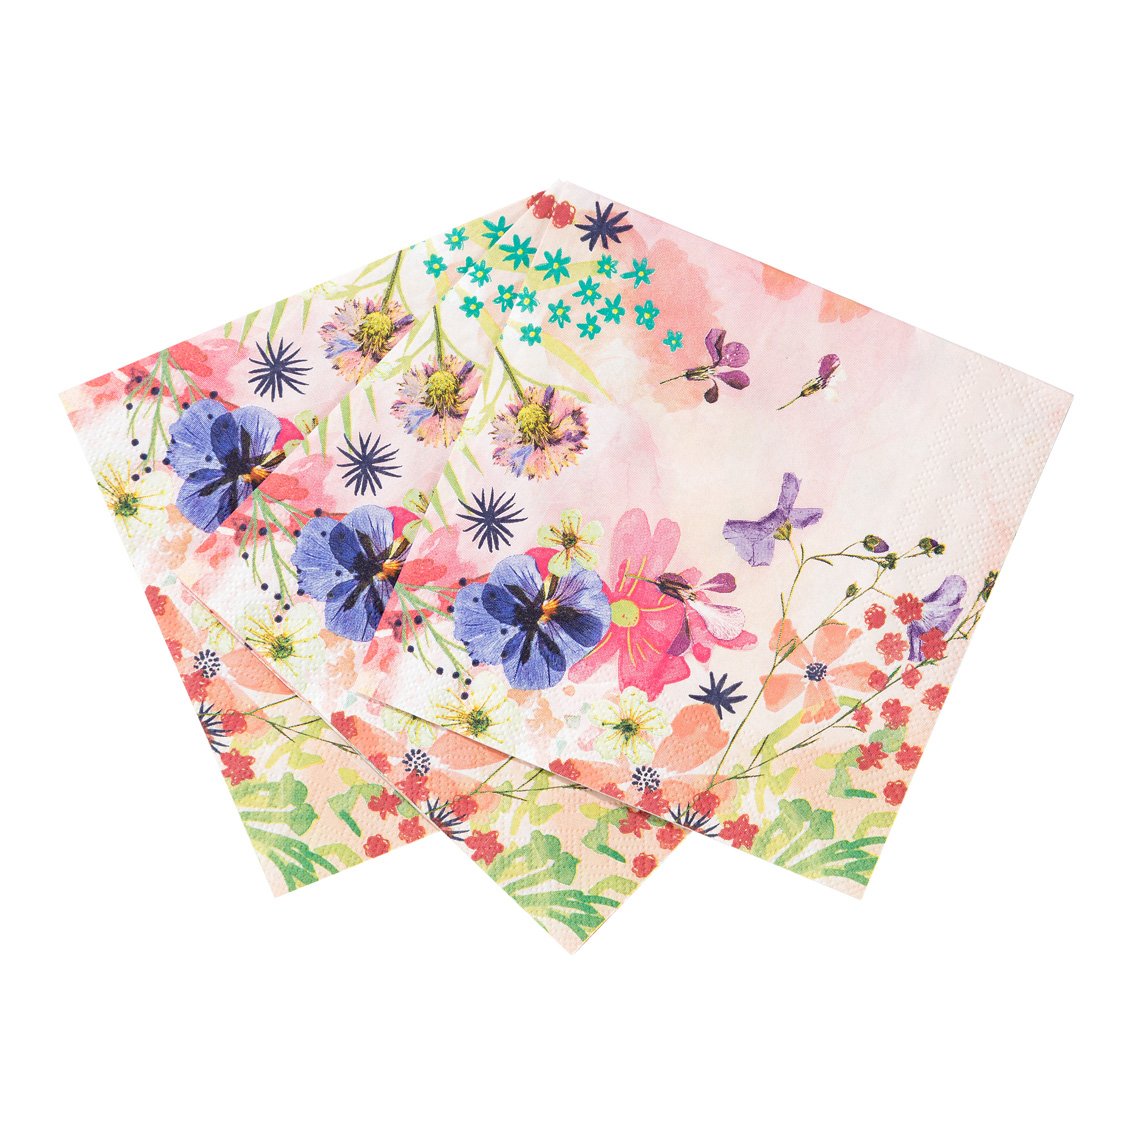 Blossom Girls floral paper Napkins for party